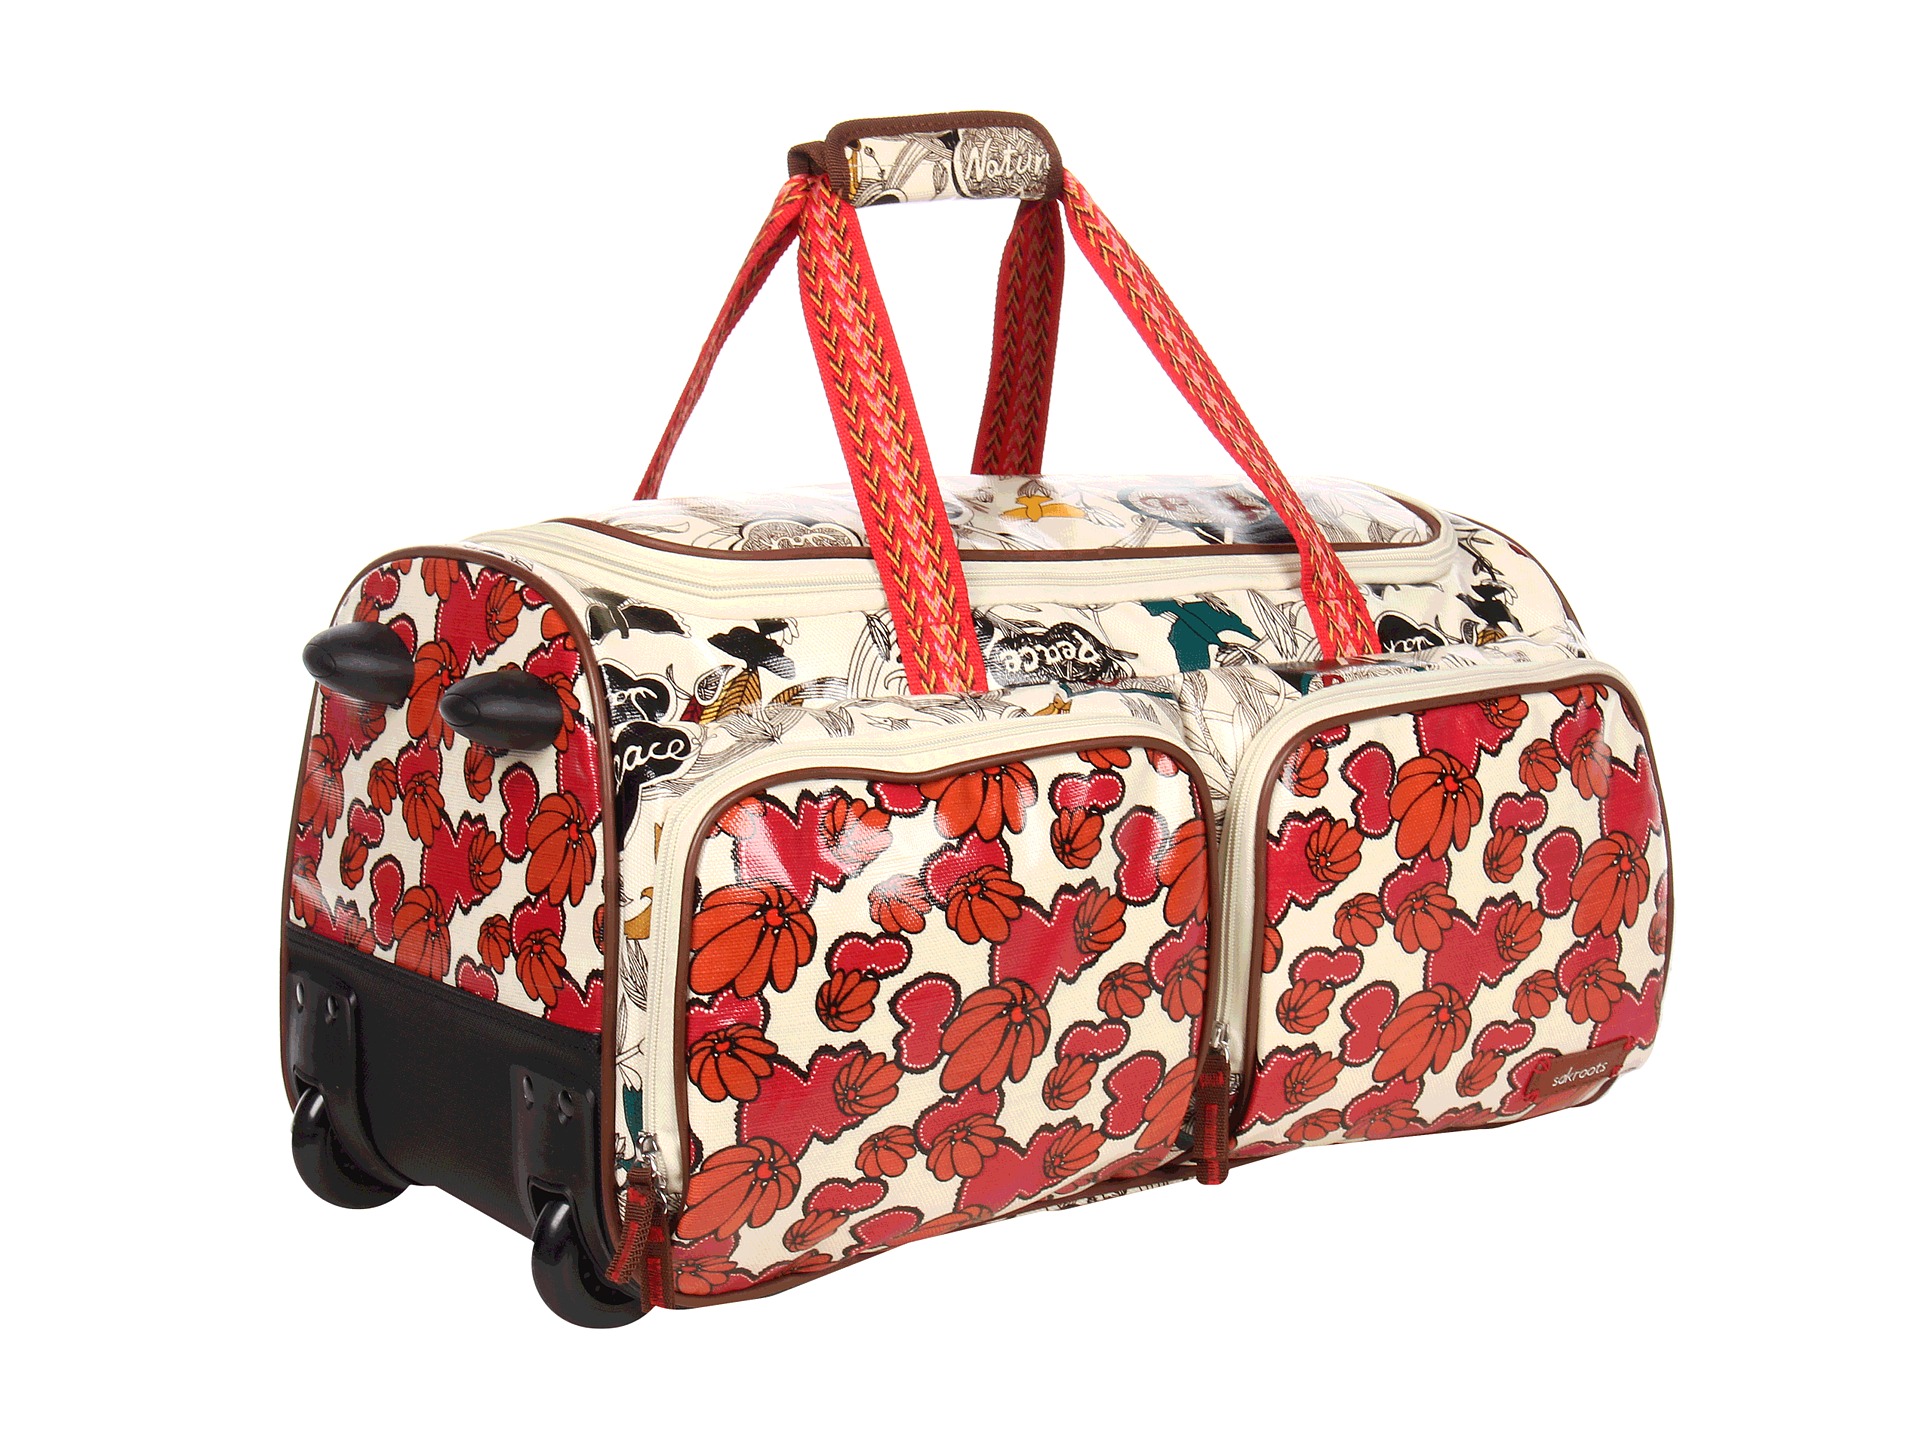 Sakroots Sak Roots Rolling Duffel, Bags | Shipped Free at Zappos